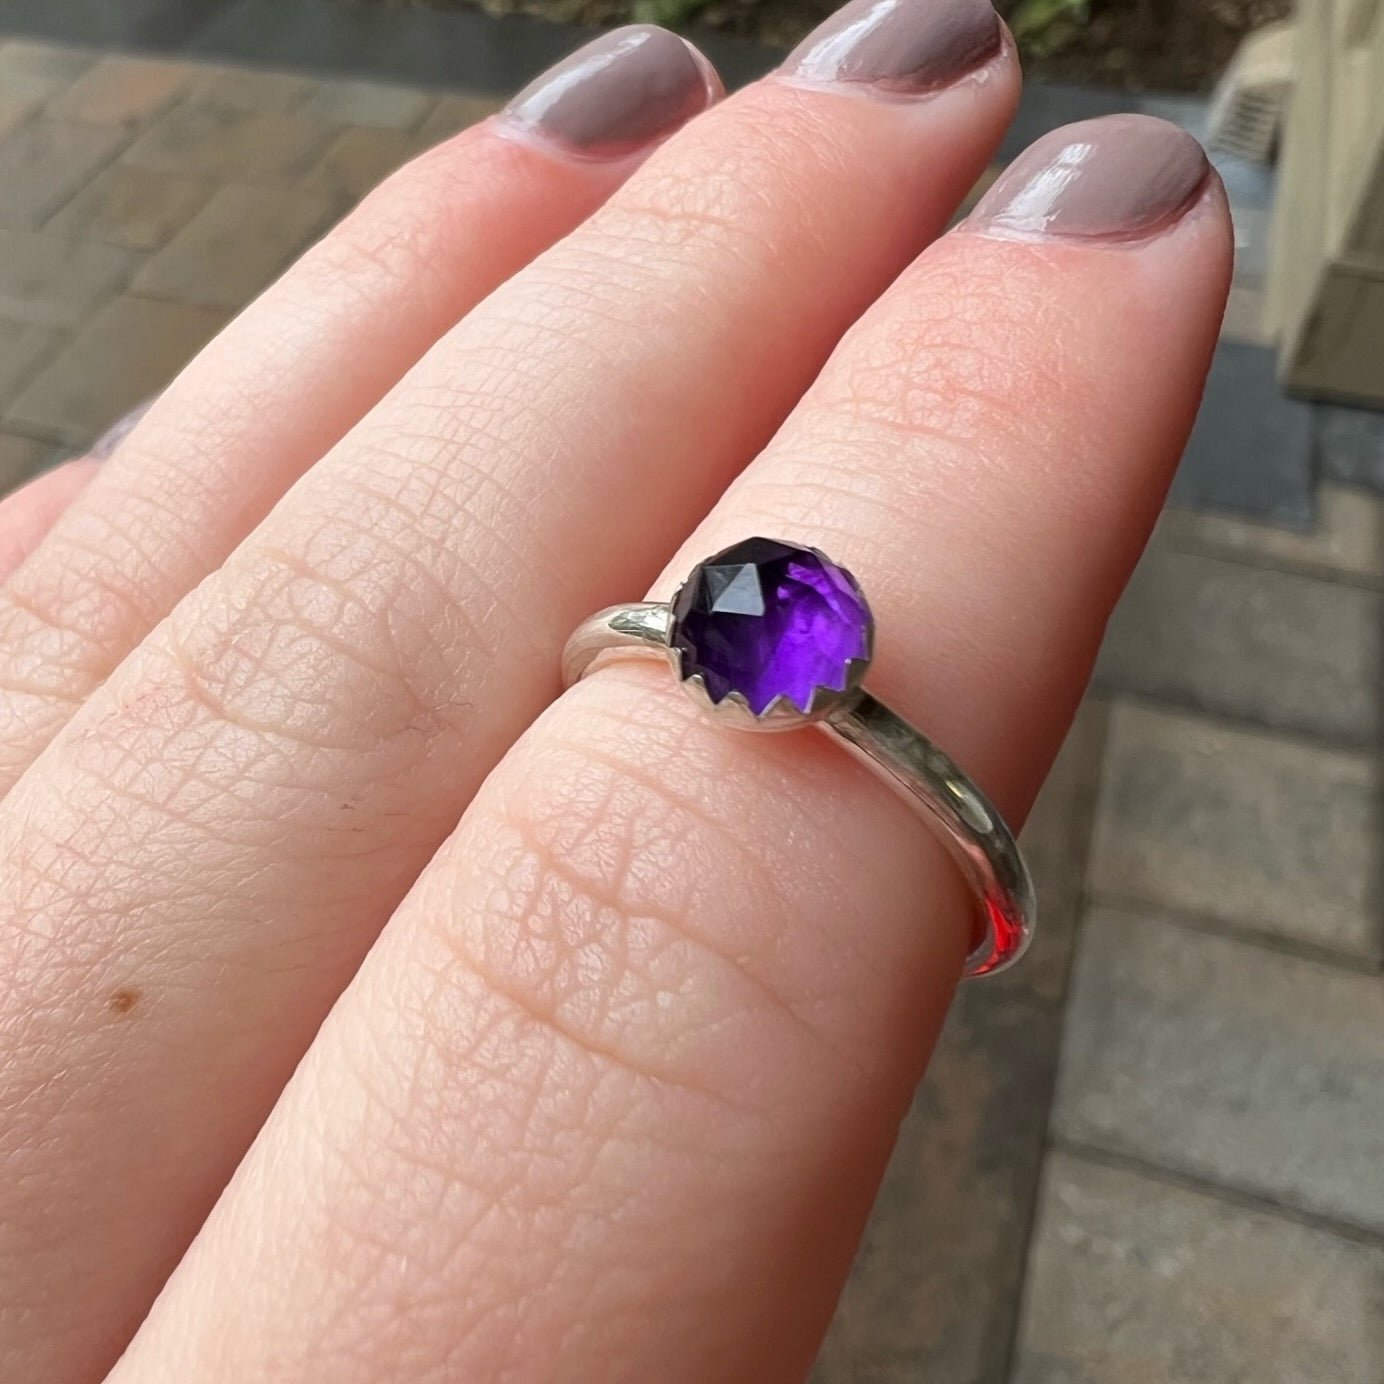 This is a 6mm rose cut round amethyst cabochon set in a sterling silver bezel setting on a sturdy silver band modeled on a hand.